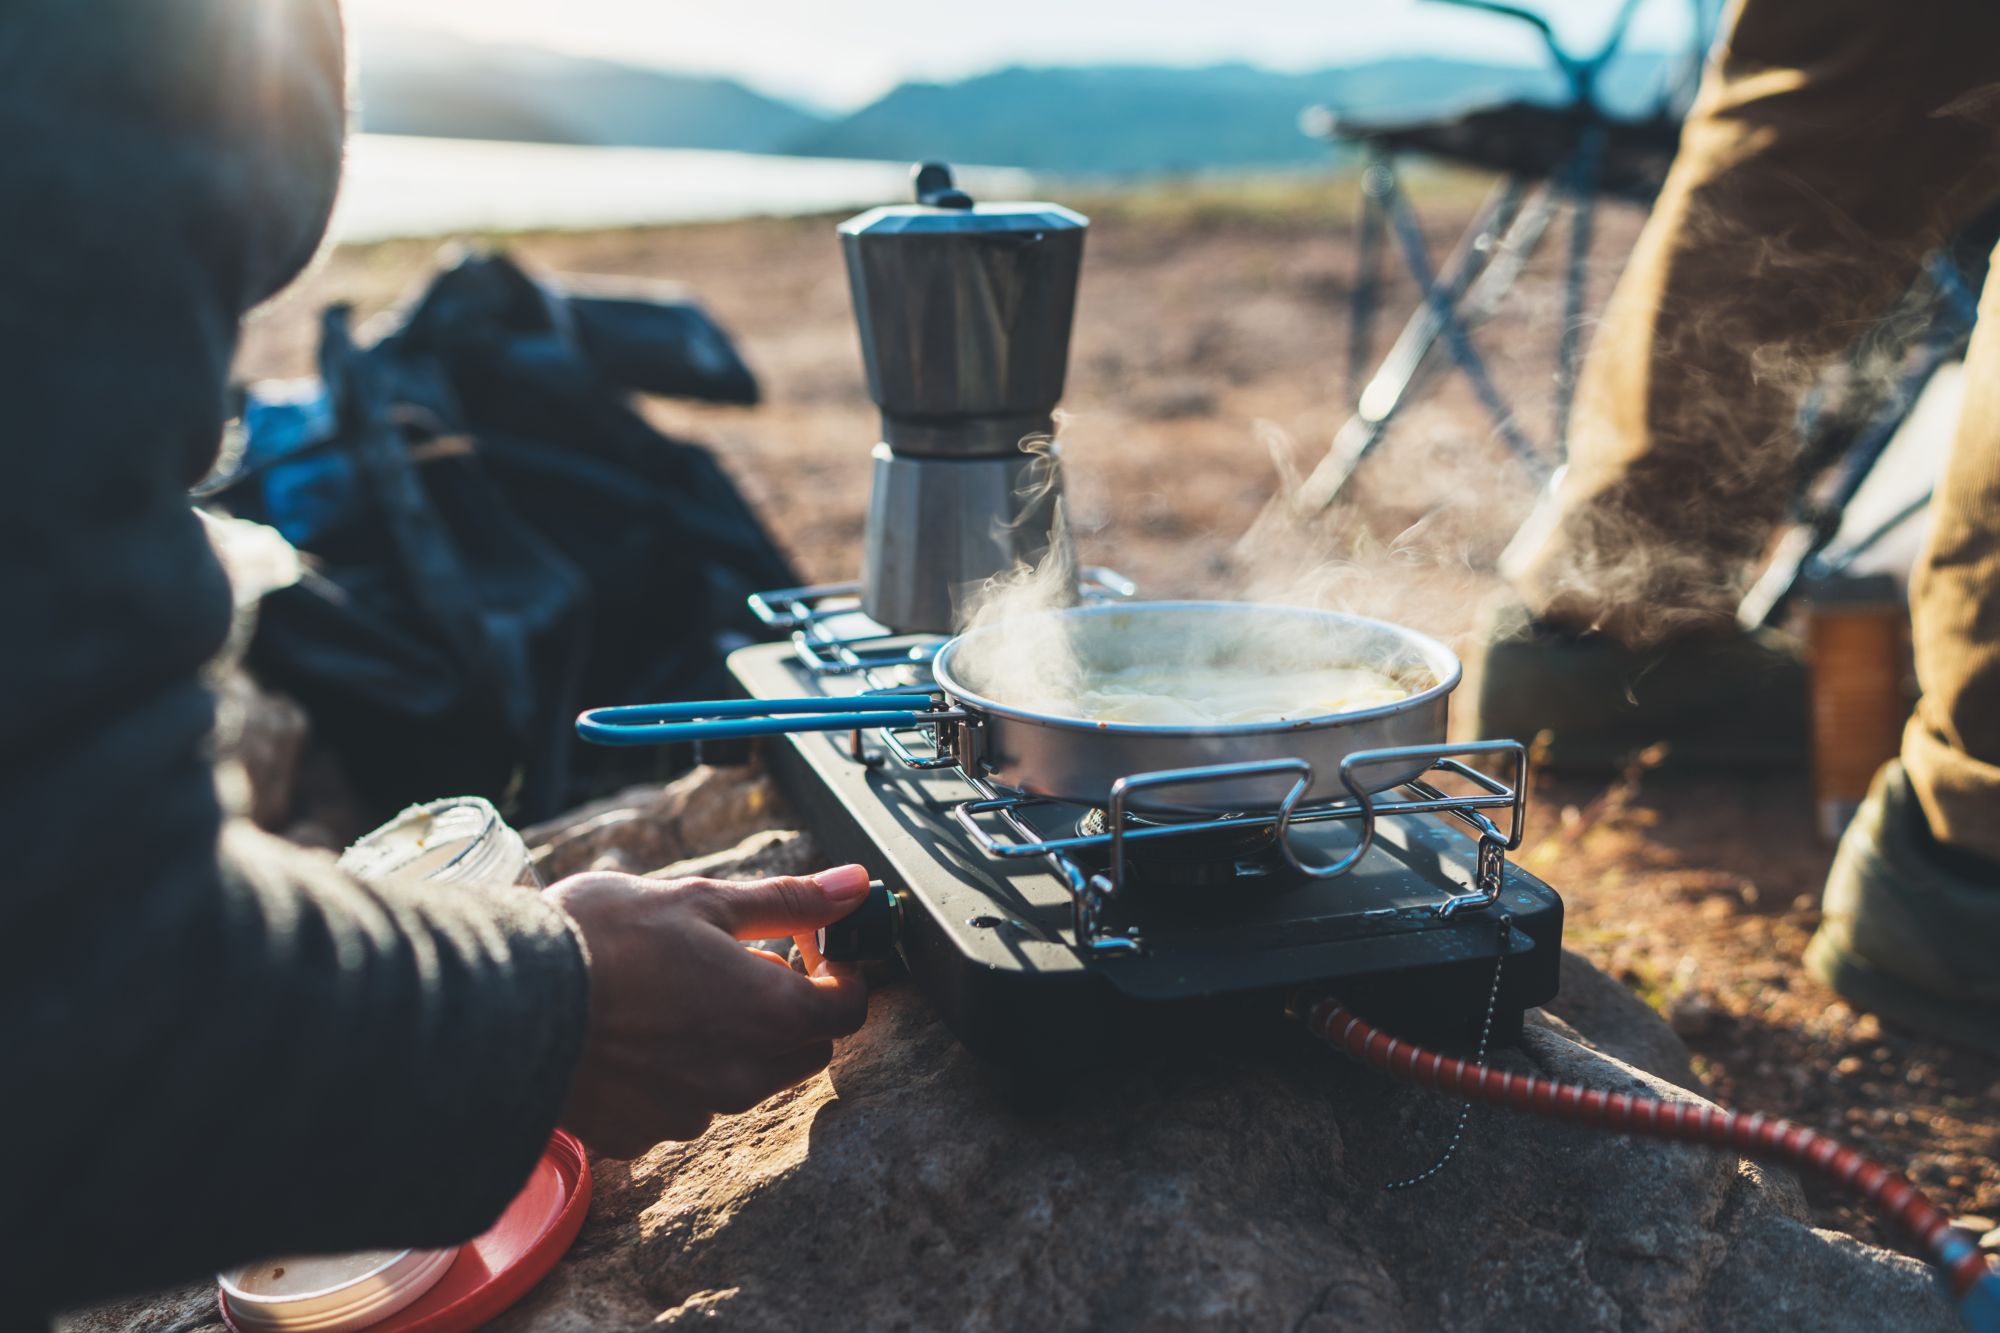 a portable stove with a pan and coffee maker